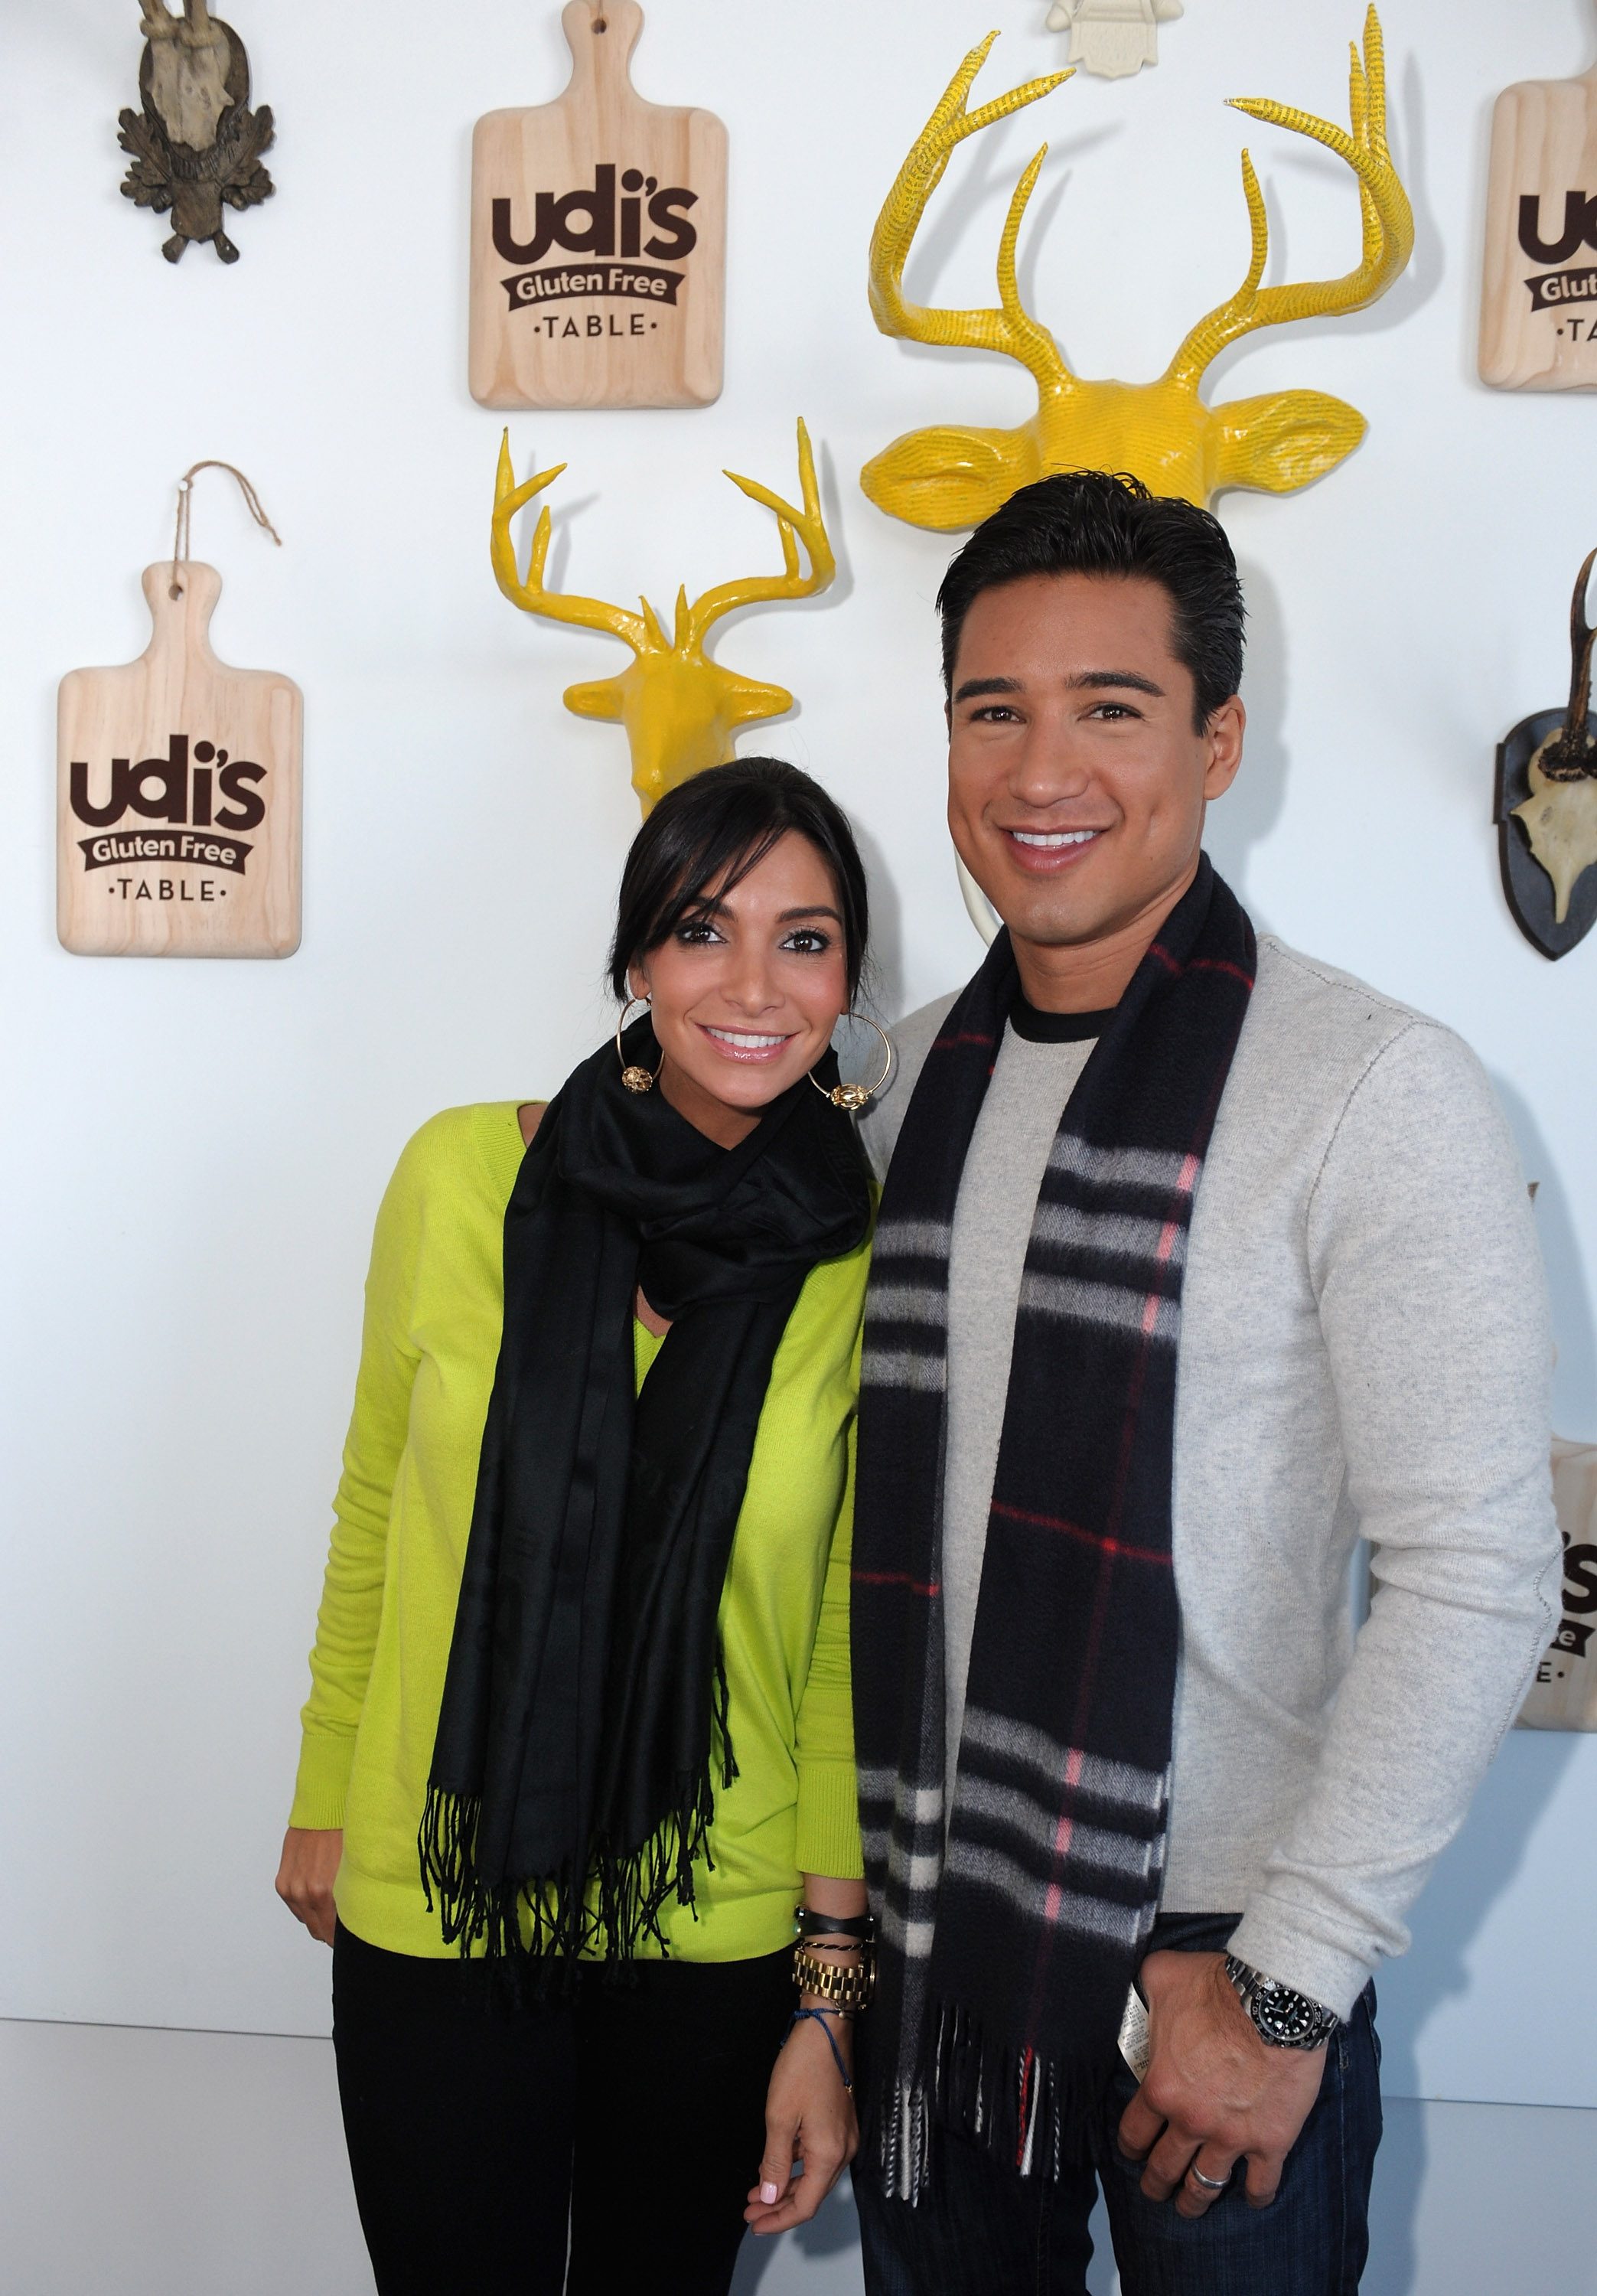 PARK CITY, UT - JANUARY 18:  Courtney Lopez and Mario Lopez attends the Udi's Gluten Free Cafe on January 18, 2013 in Park City, Utah.  (Photo by Gustavo Caballero/Getty Images for Udi's Gluten Free Table)